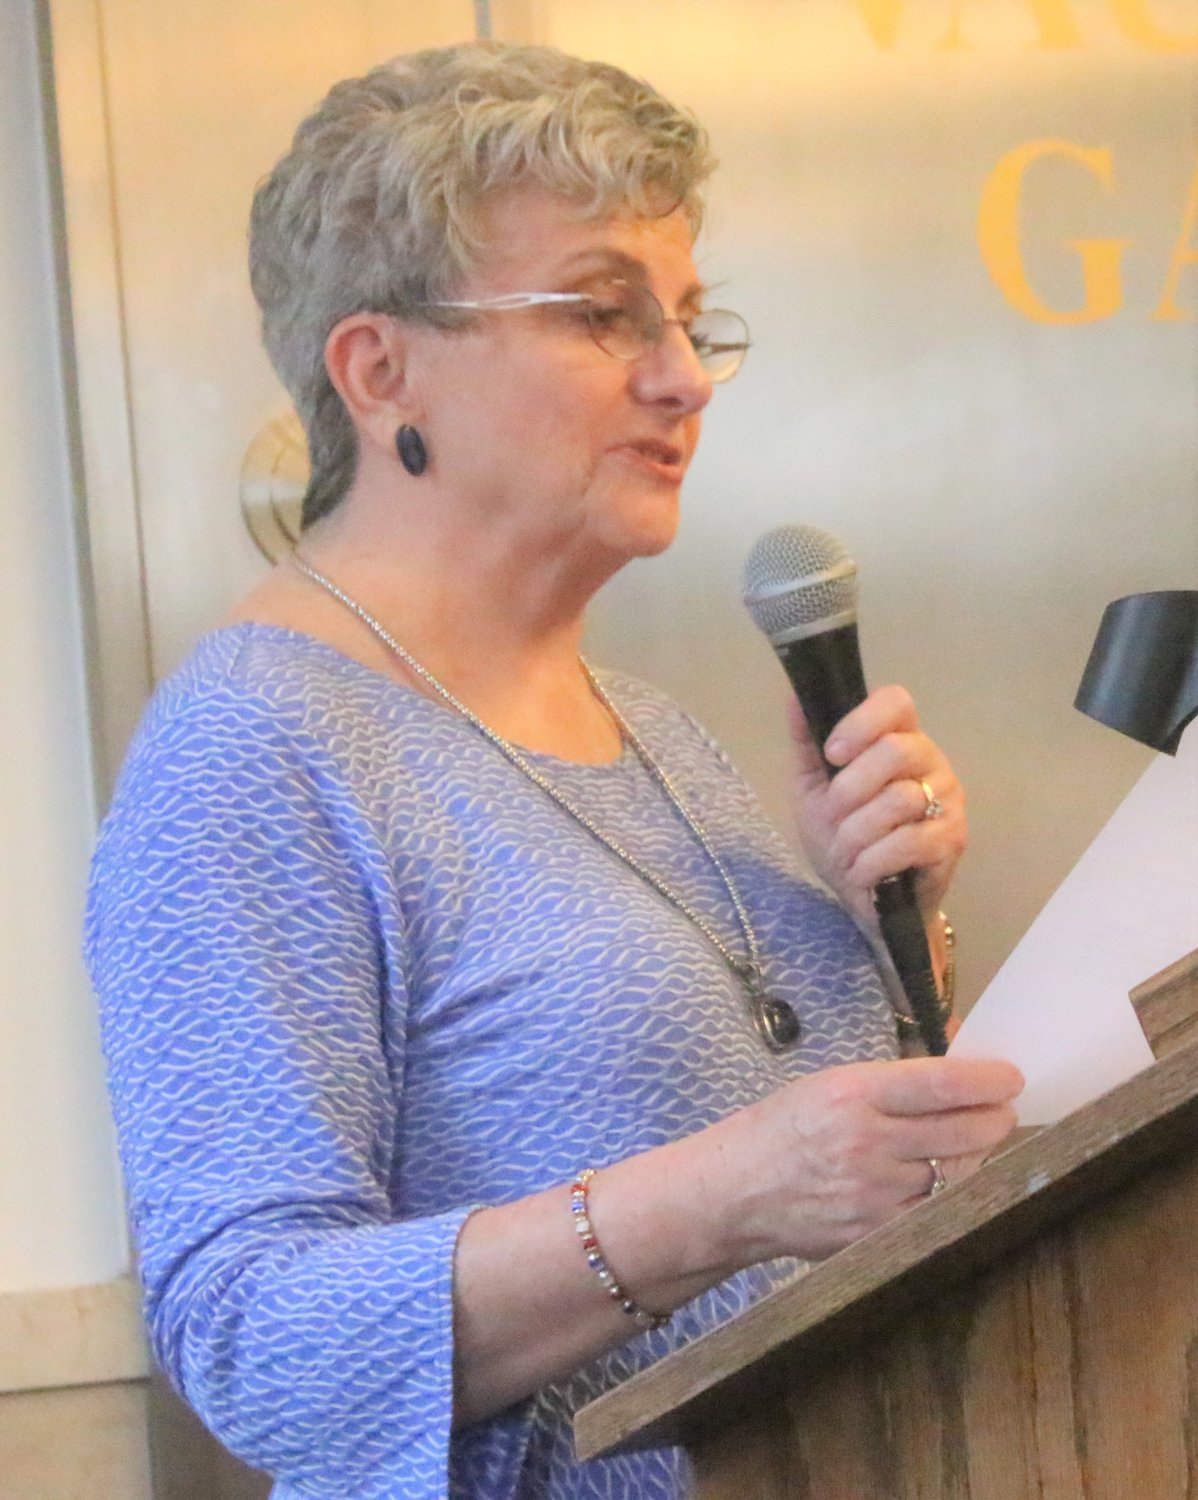 Alice Leonatti, Voters Service Chairman for the Mexico Audrain County League of Women Voters, played host to Thursday's Candidates' Forum prior to Tuesday's primaries. (Alan Dale)